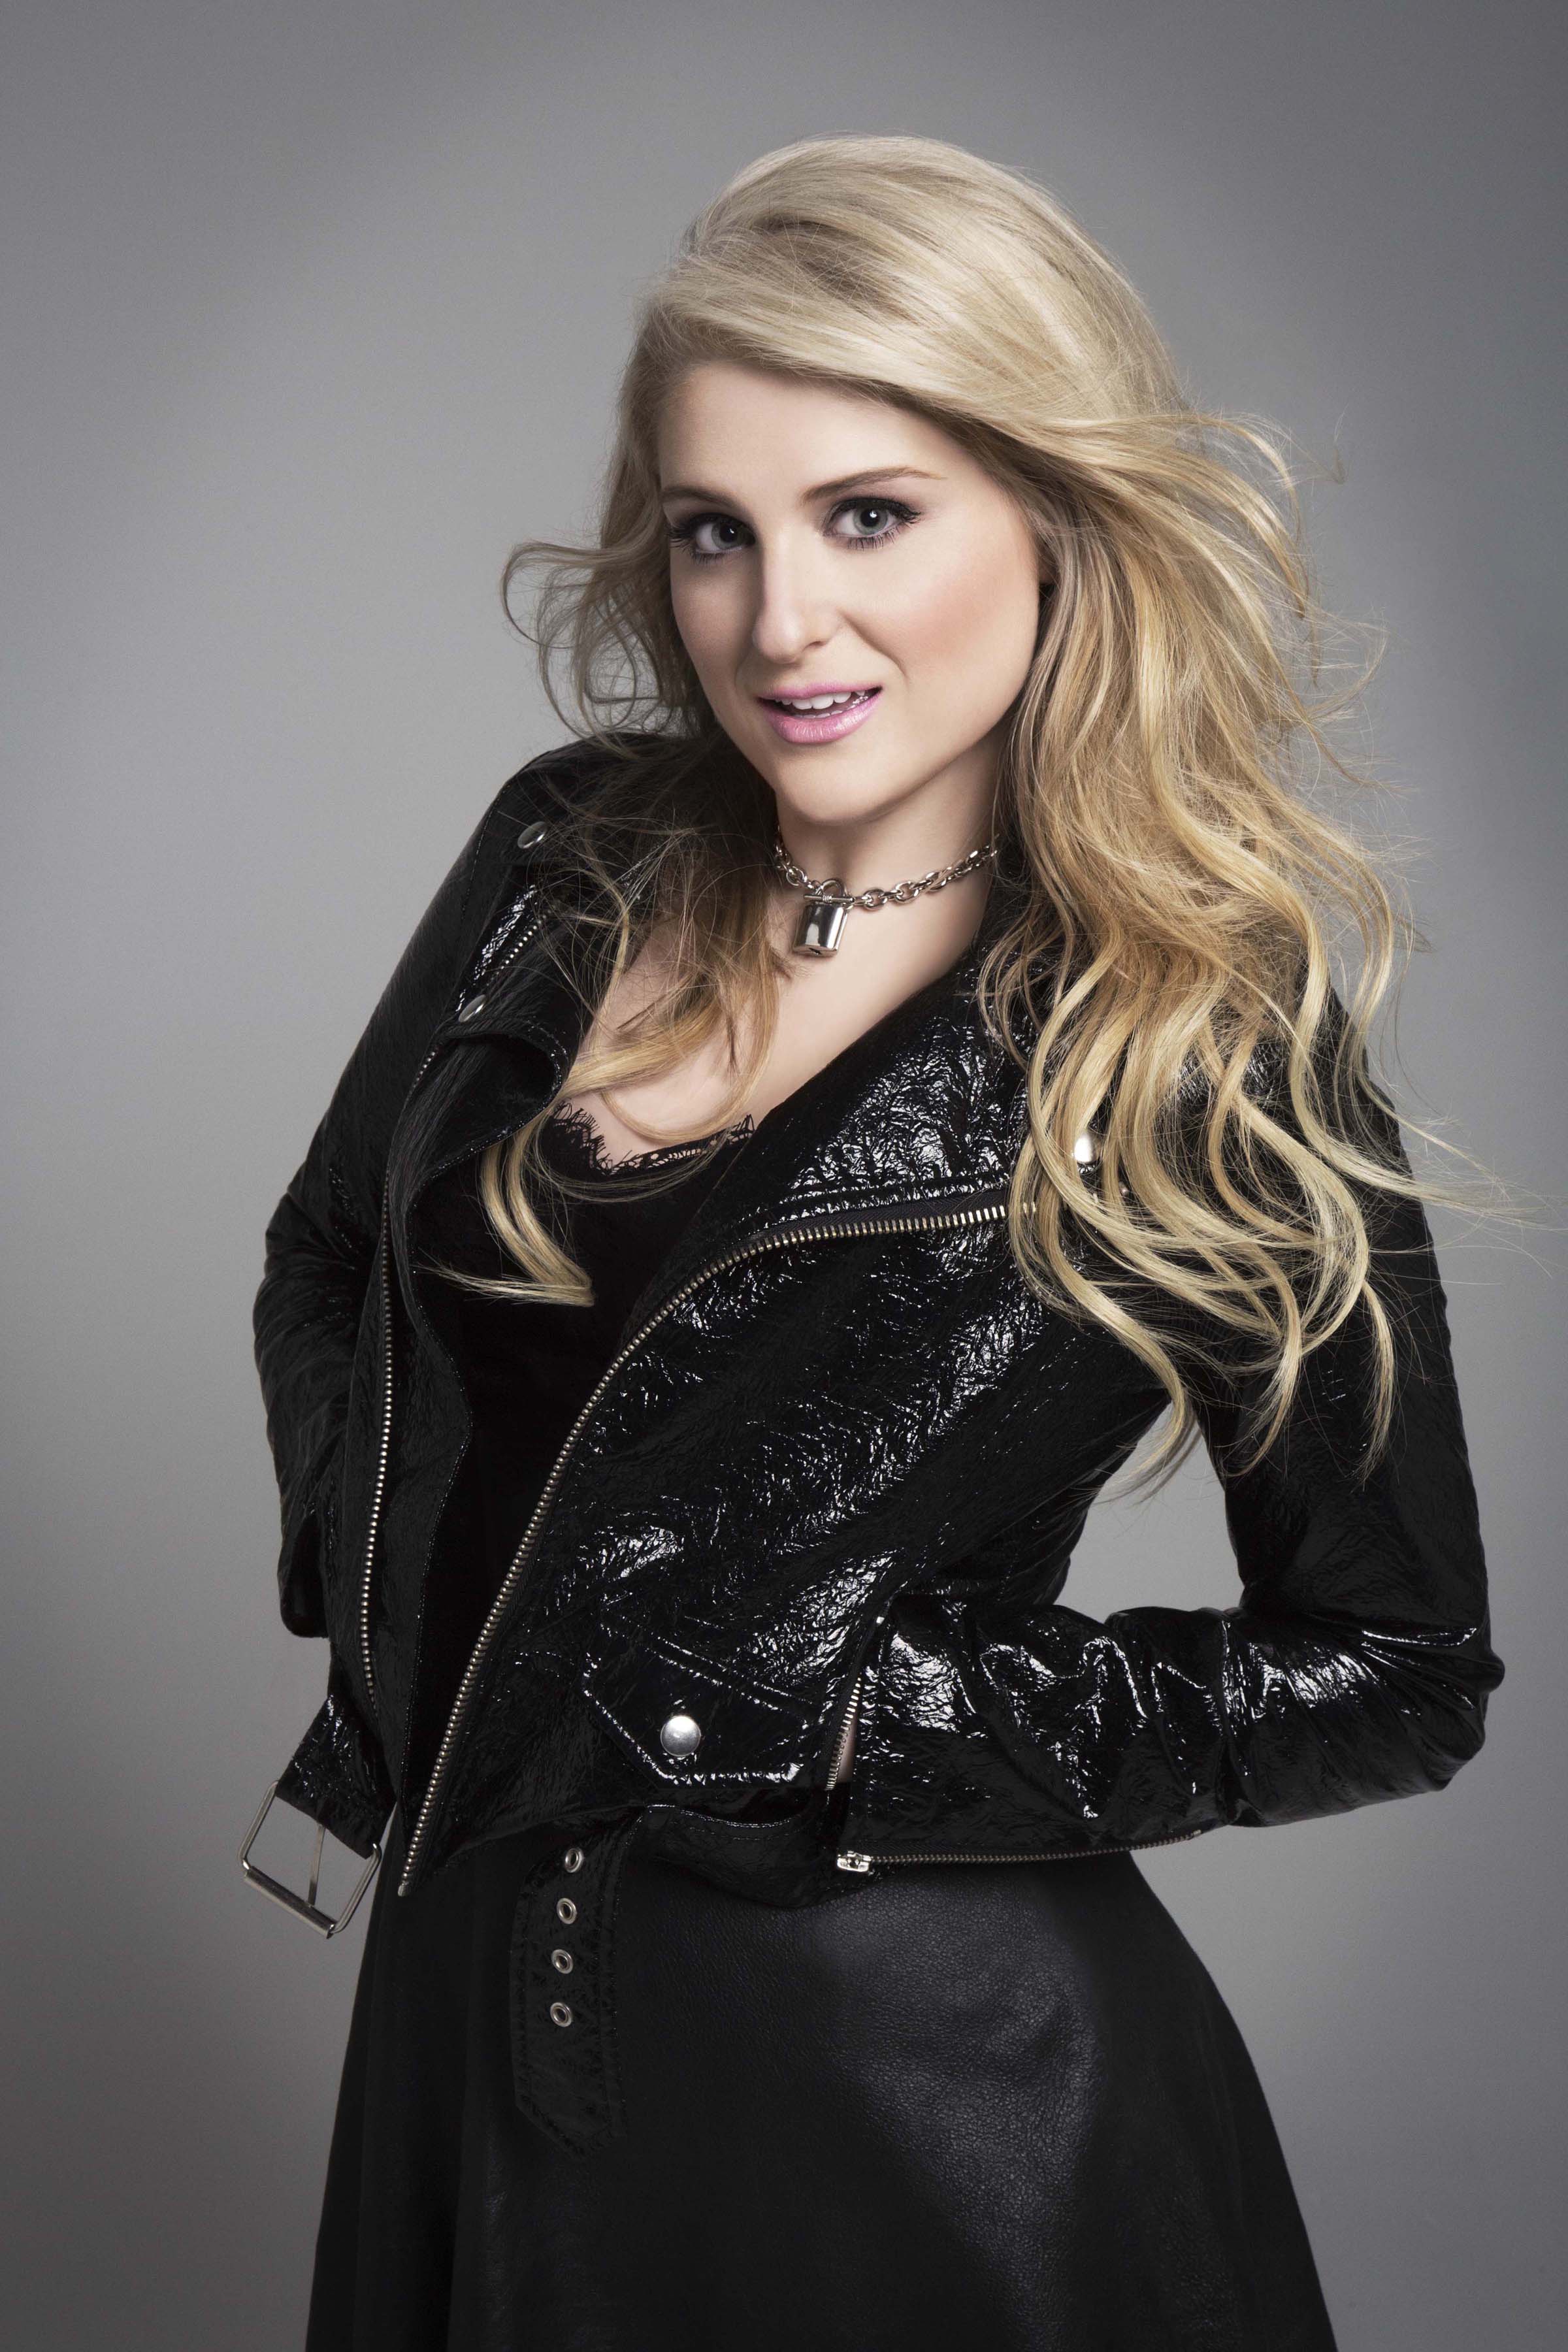 Meghan Trainor Wallpapers High Resolution and Quality Download.